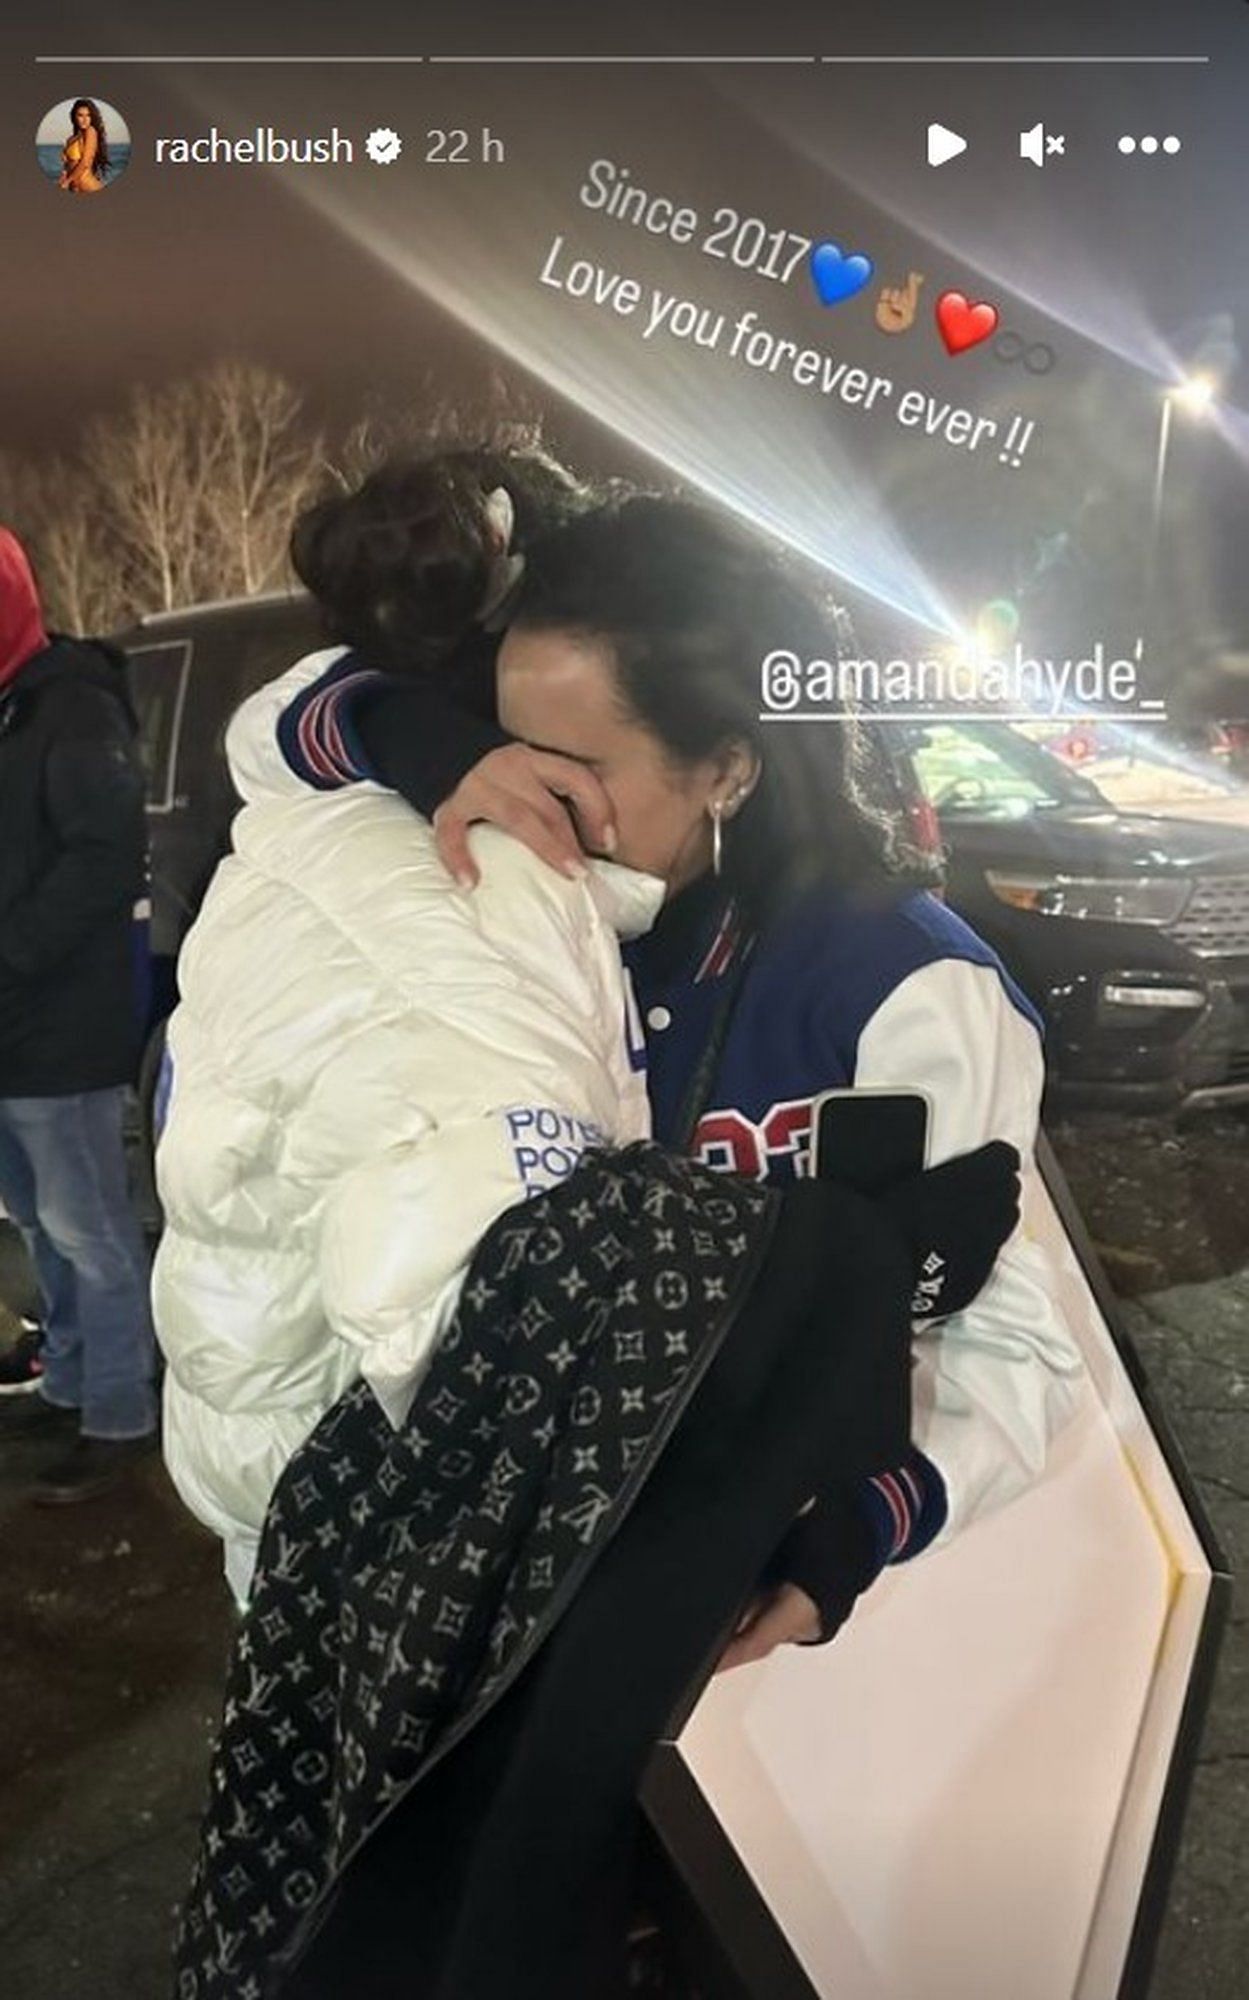 Amanda Hyde and Rachel Bush embracing for what could be the last time in Buffalo